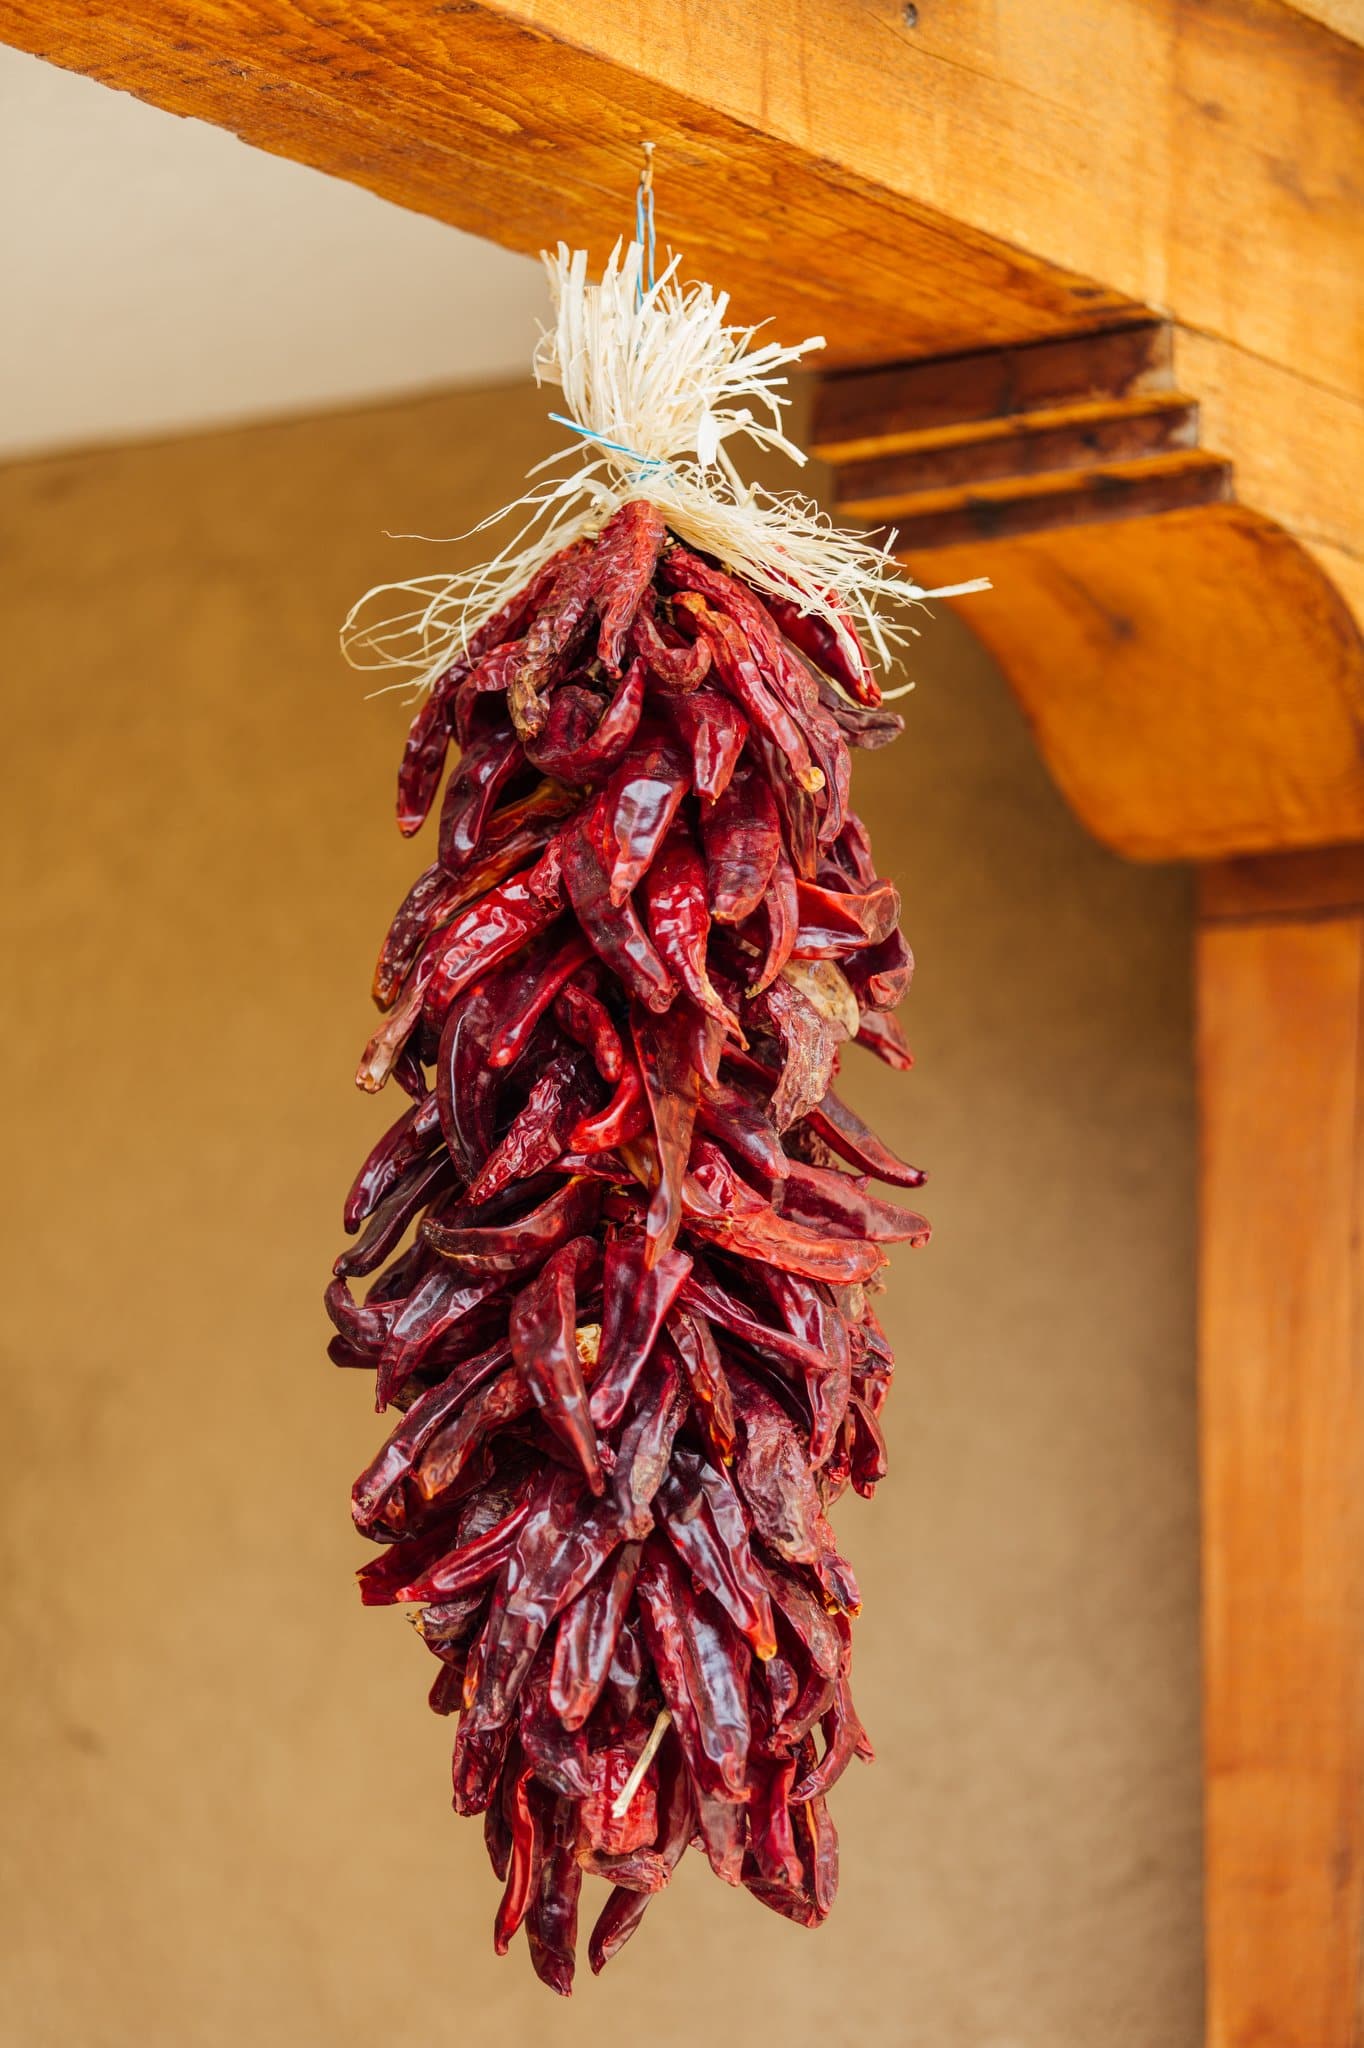 A hanging ristra of Traditional Sandia Ristras tied together with twine, displayed under a wooden beam.